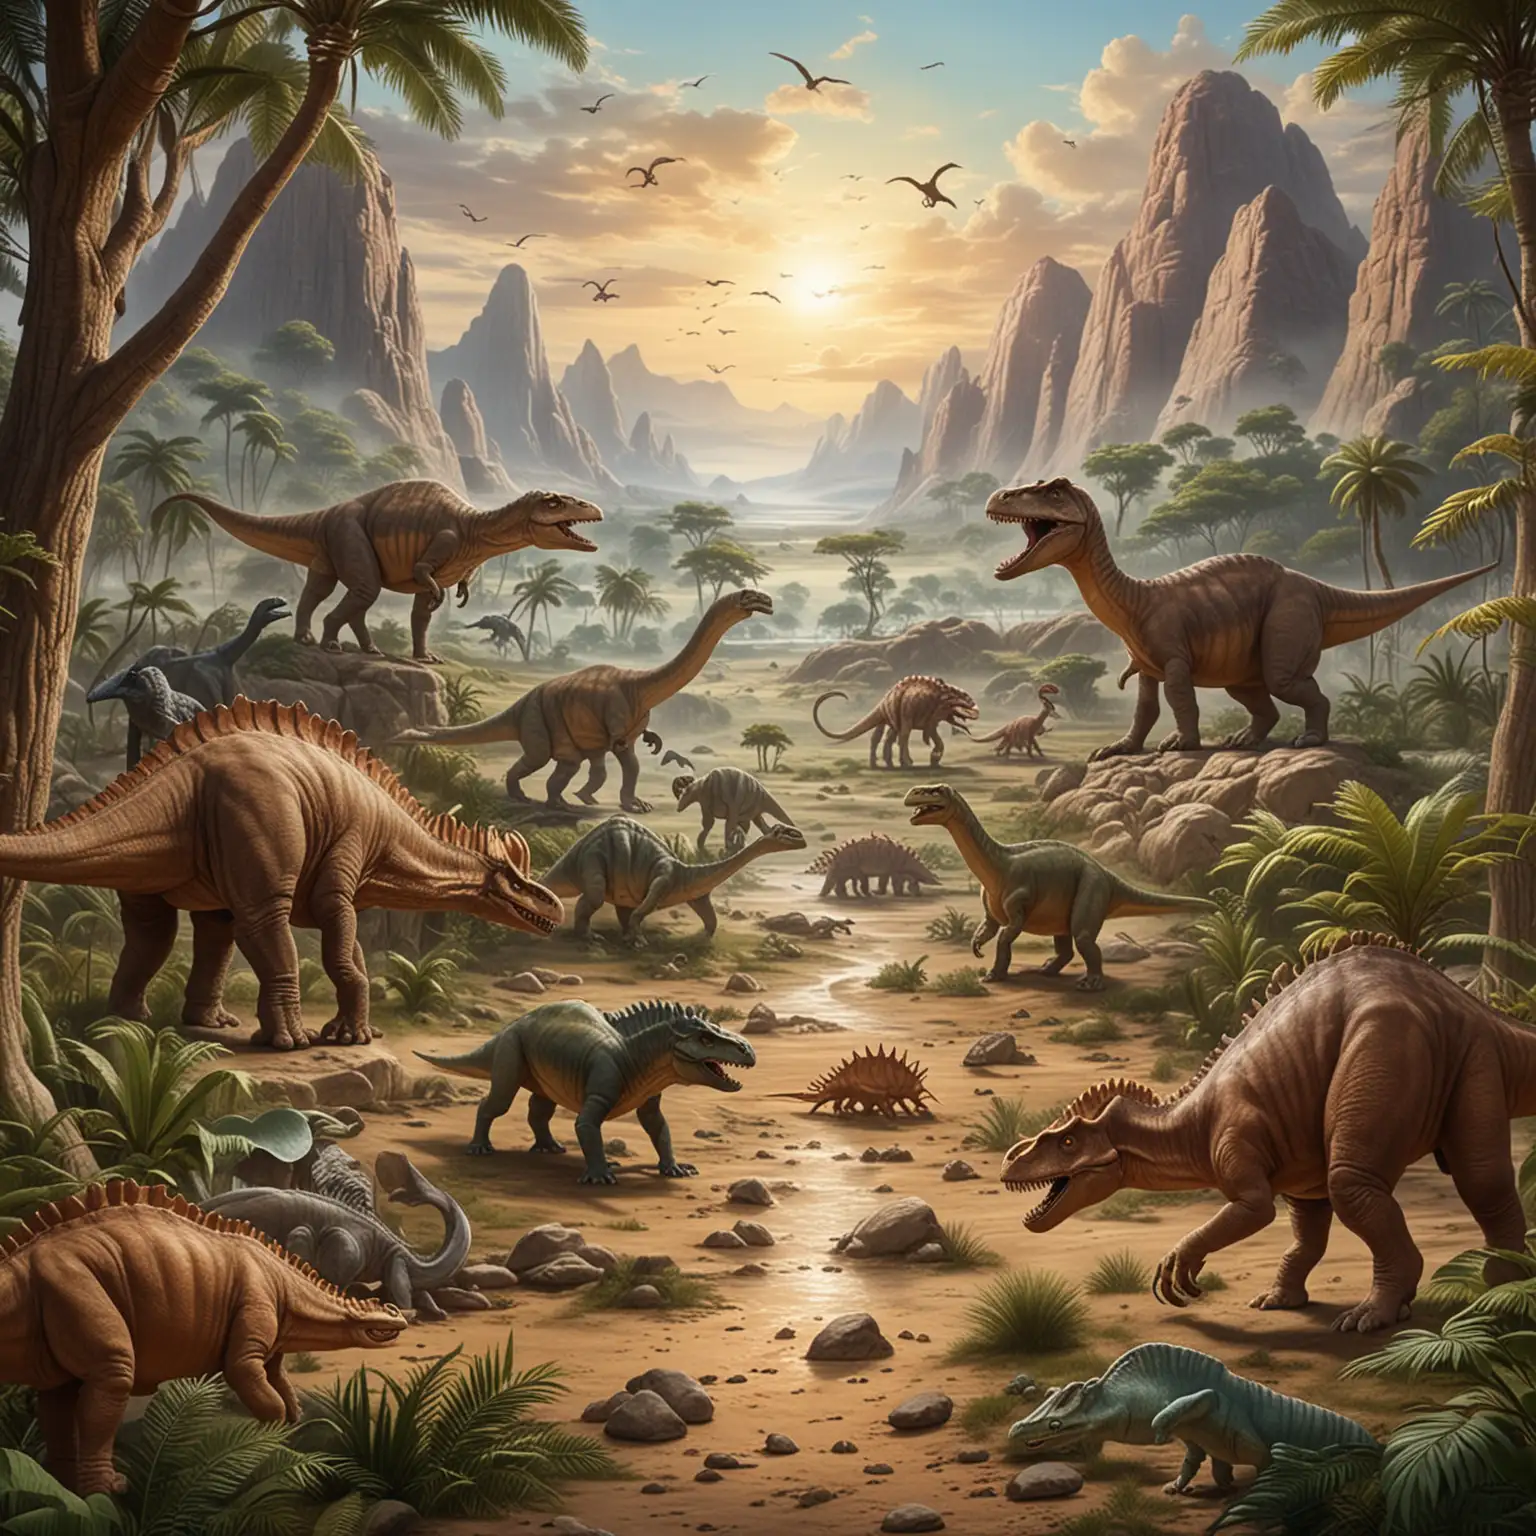 prehistoric setting with various dinosaurs